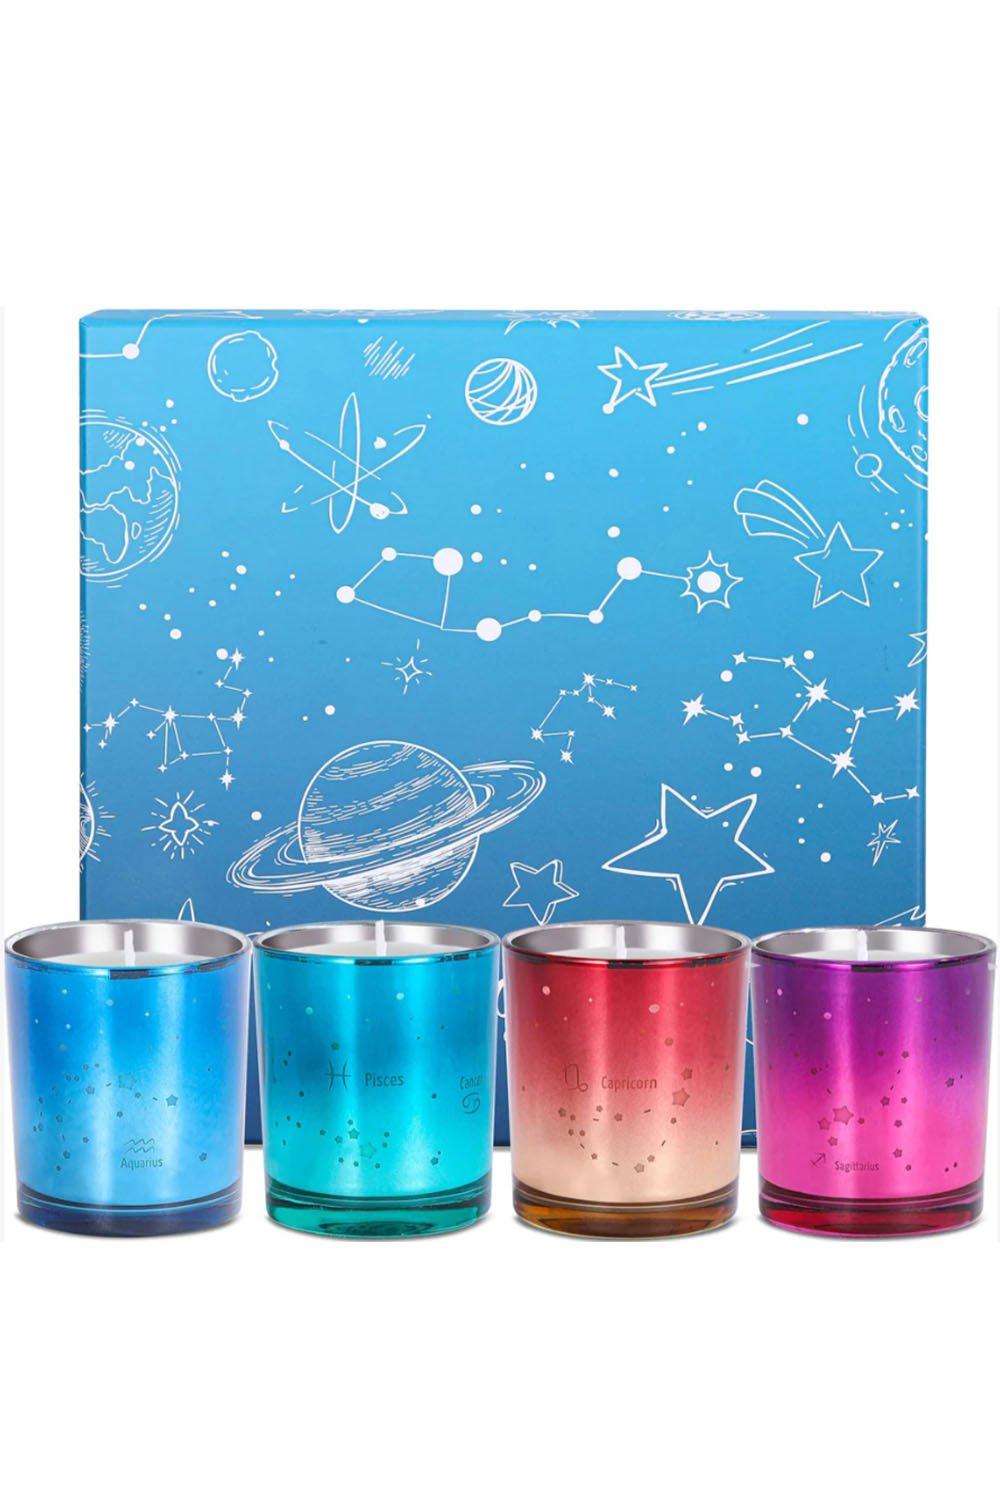 Set of 4 Constellation Scent Candle Gift Set